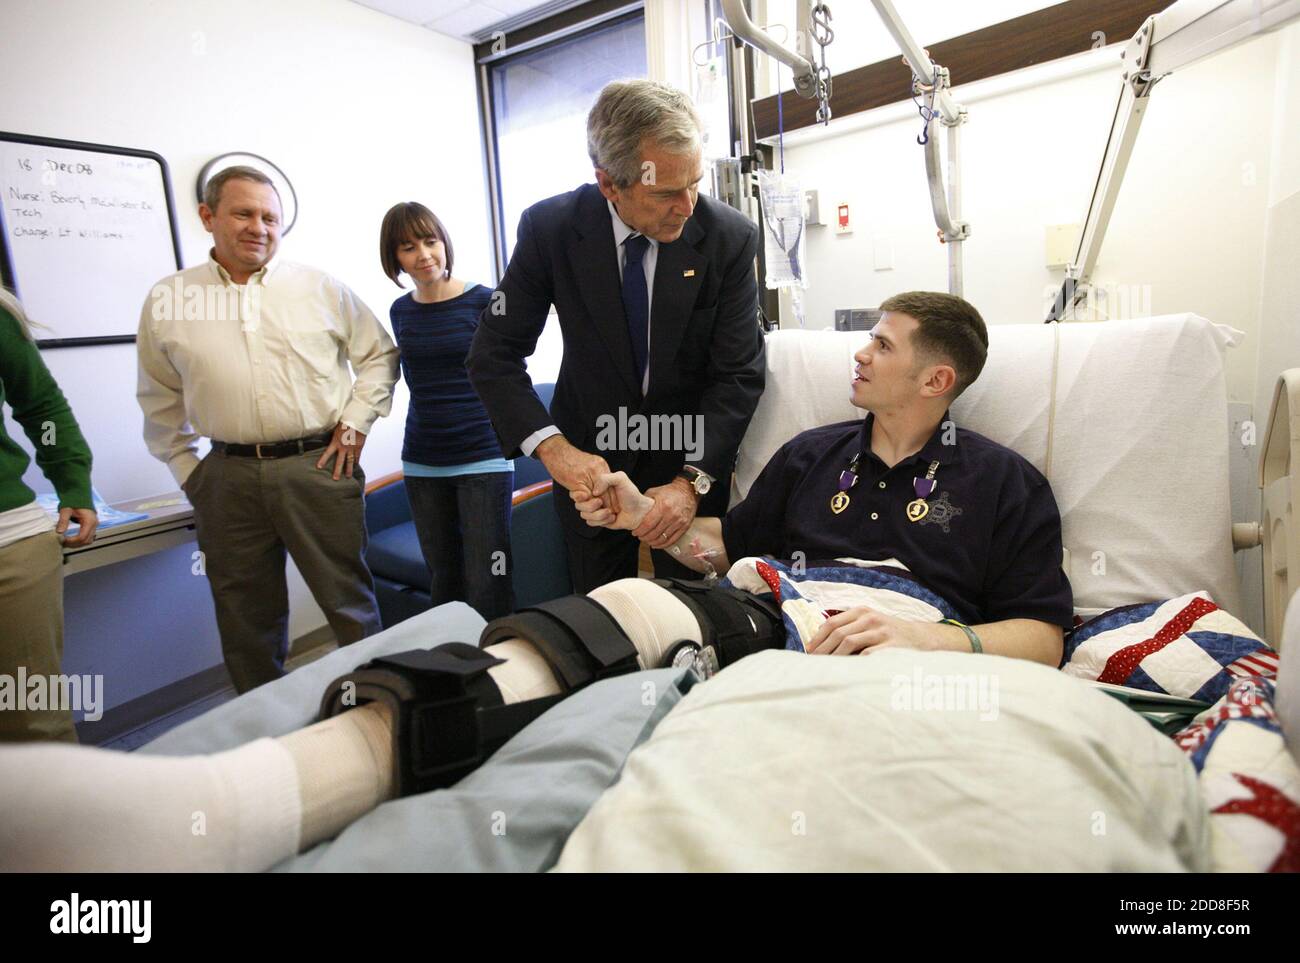 NO FILM, NO VIDEO, NO TV, NO DOCUMENTARY - US President George W. Bush shakes hands with U.S. Army Staff Sgt. Kyle Stipp of Avon, Ind., after presenting him with two Purple Hearts, during a visit to Walter Reed Army Medical Center, where the soldier is recovering from wounds suffered in Operation Iraqi Freedom, in Washington, DC, USA on Monday, December 22, 2008. Photo by Eric Draper/White House/MCT/ABACAPRESS.COM Stock Photo